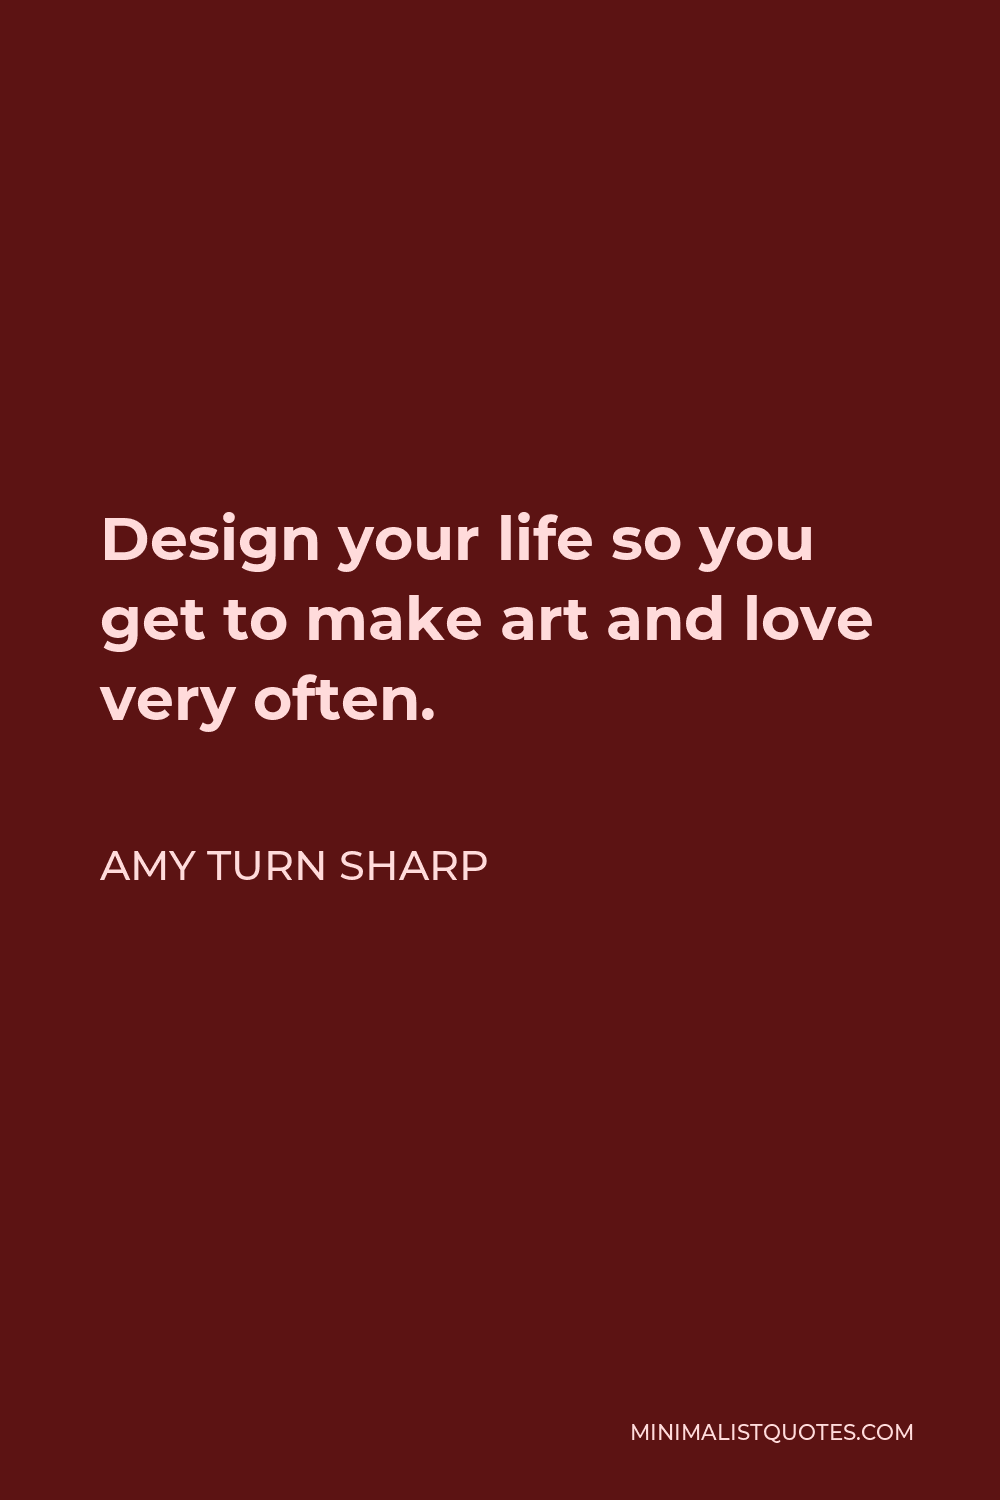 Amy Turn Sharp Quote - Design your life so you get to make art and love very often.